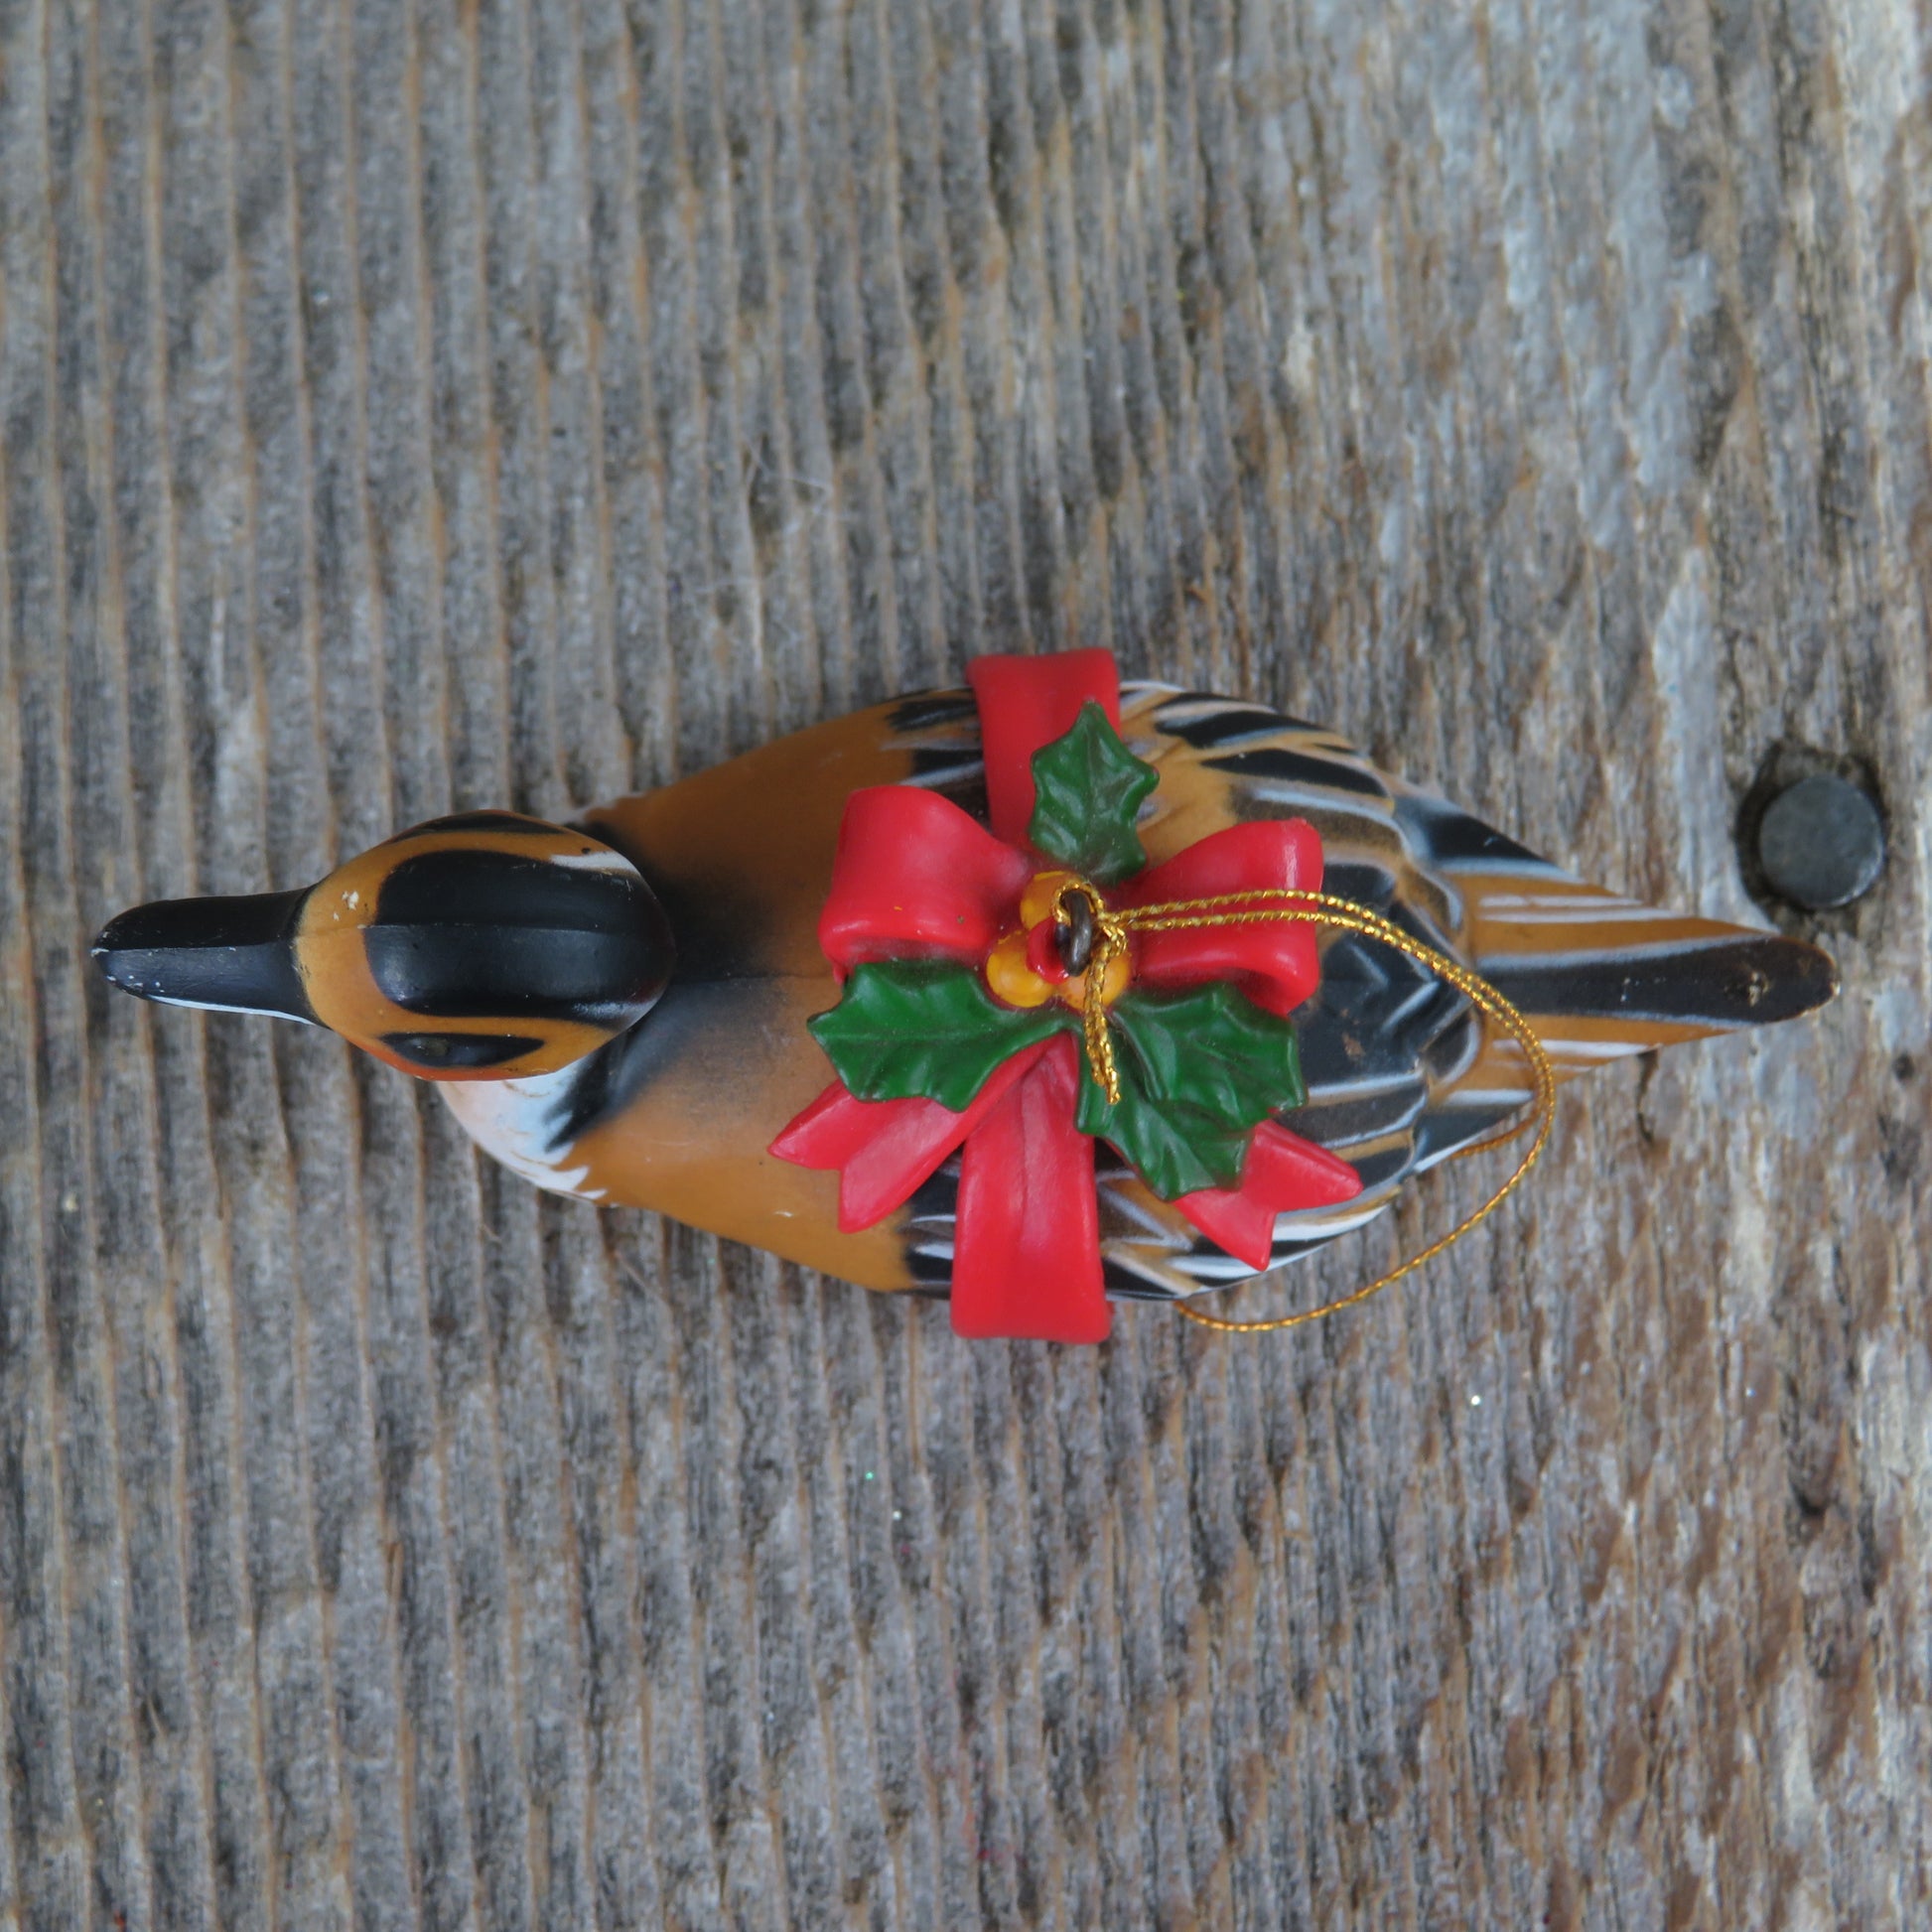 Vintage Duck Ornament Fulvous Whistling Red Bow Bird Christmas Yellow Decoy Hong Kong - At Grandma's Table